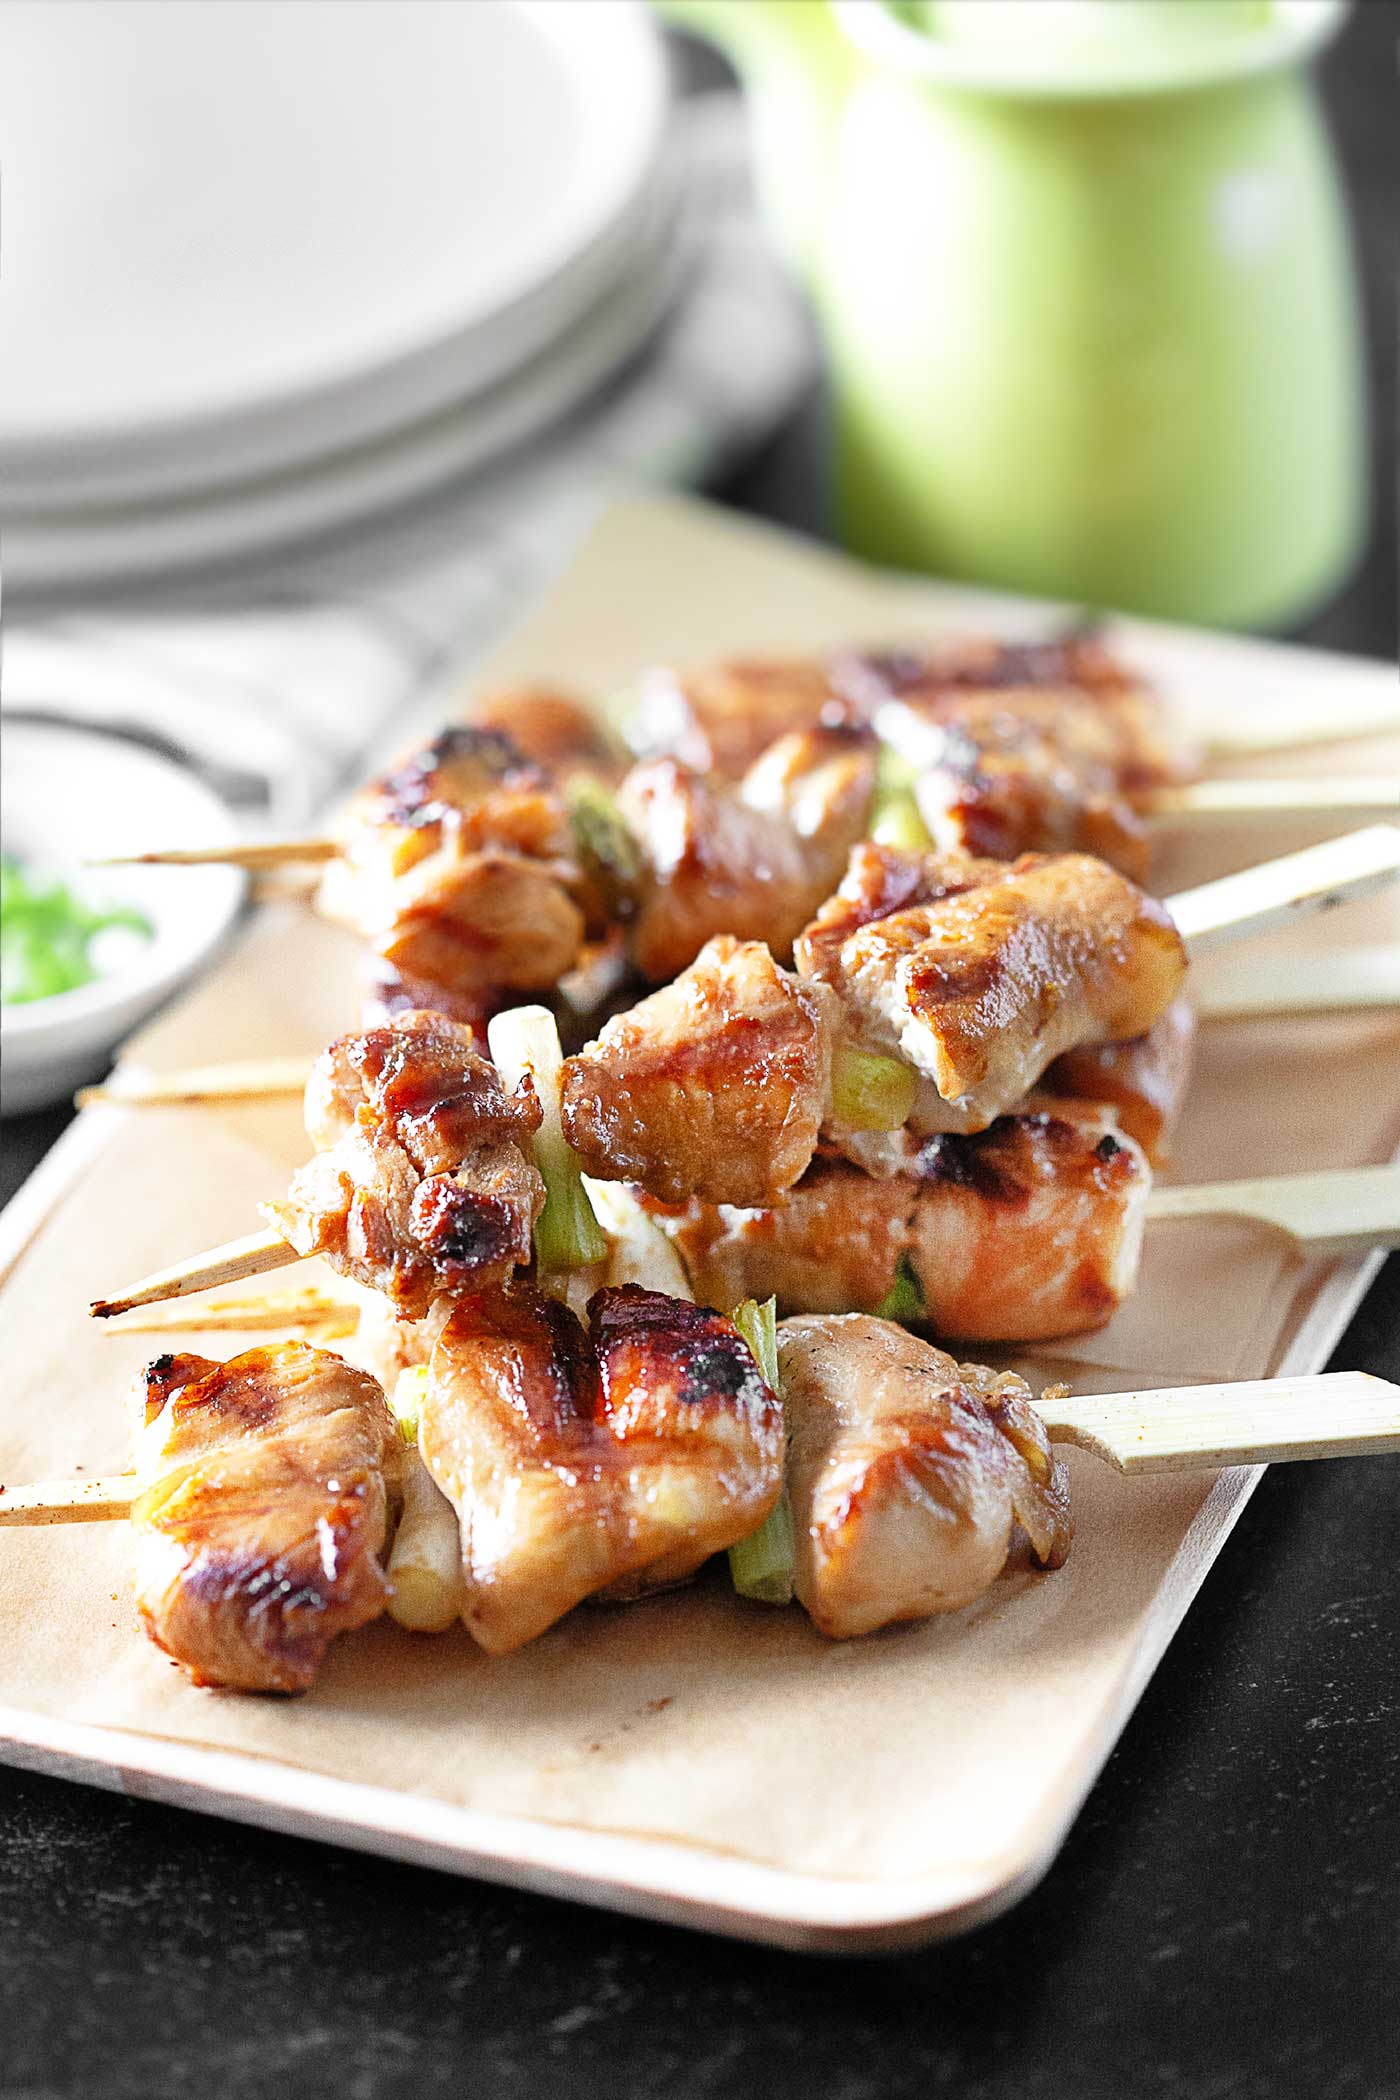 Skewers stacked on plate